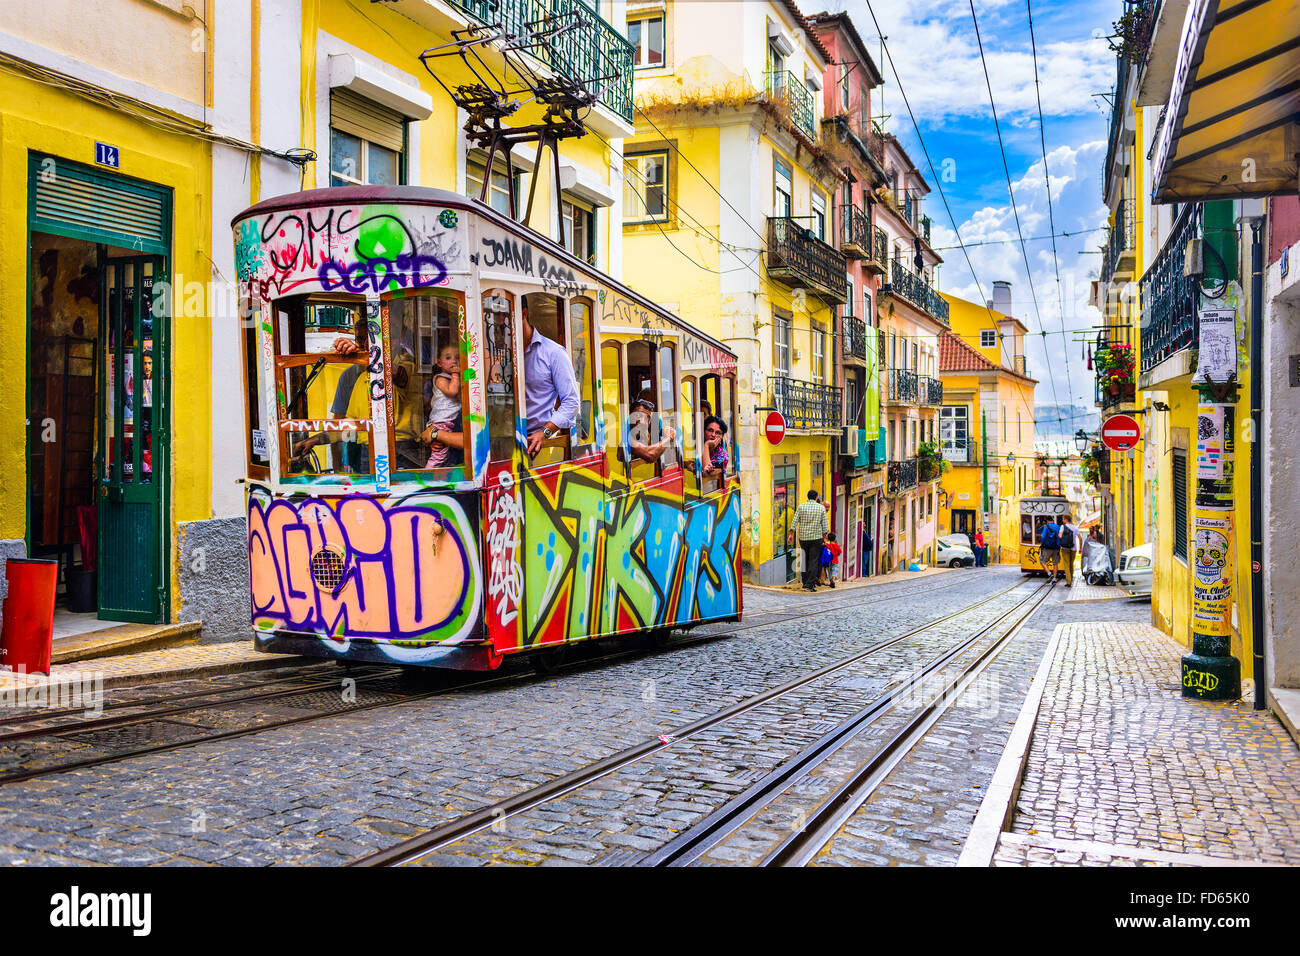 LISBON, PORTUGAL - SEPTEMBER 12, 2014: Pedestrians and trams in Lisbon. The historic trams are a popular attraction. Stock Photo